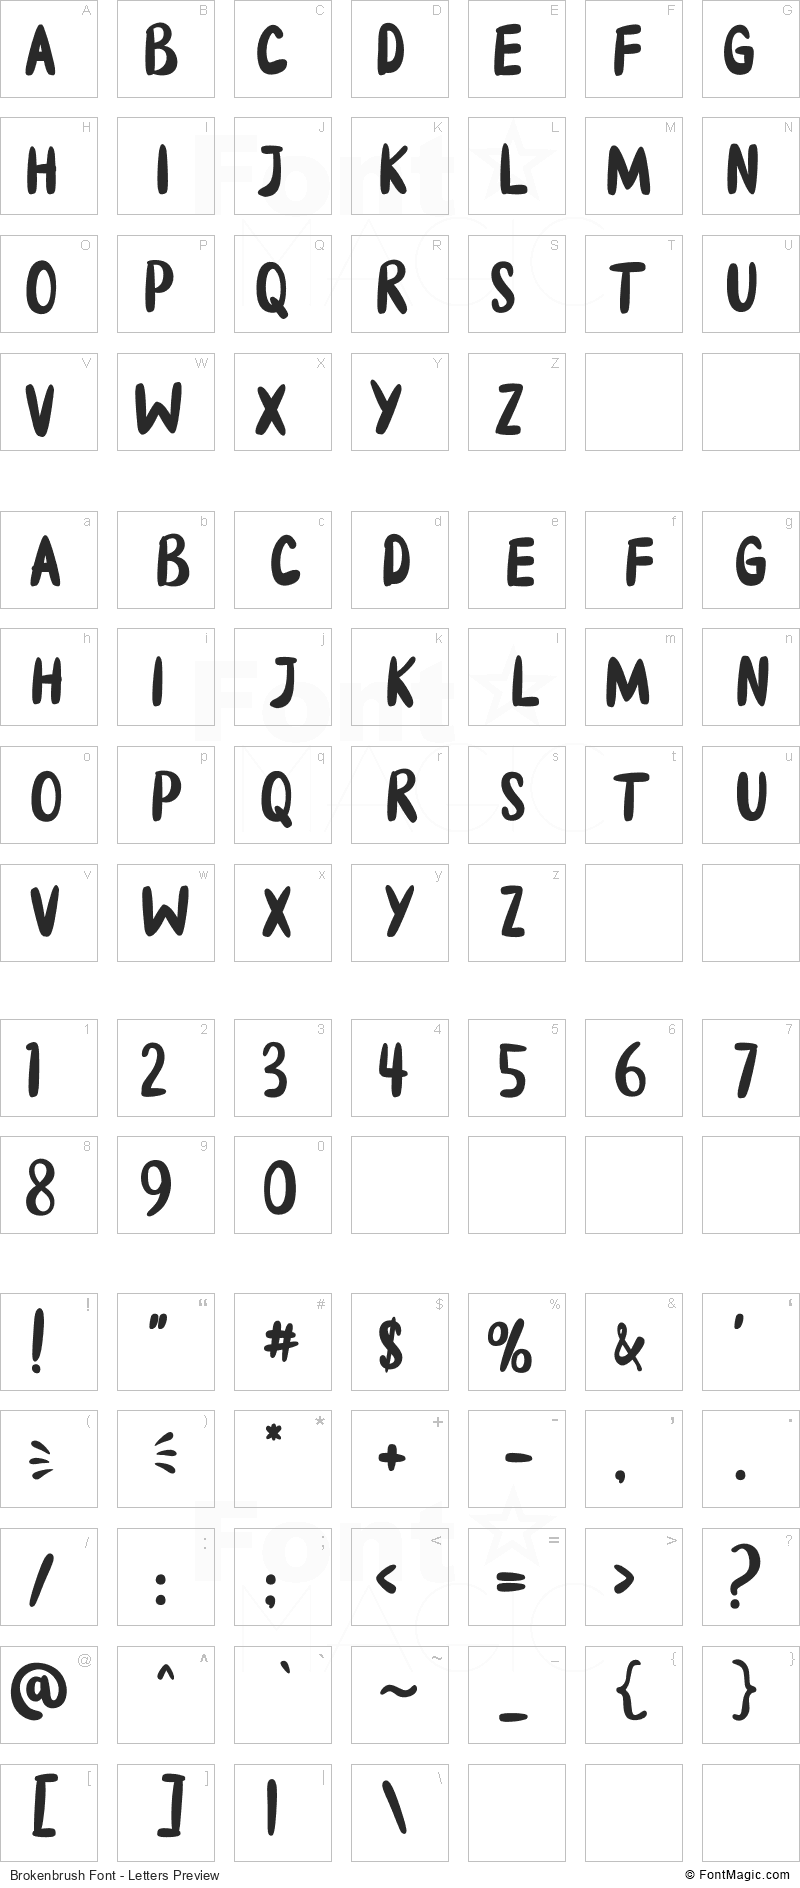 Brokenbrush Font - All Latters Preview Chart